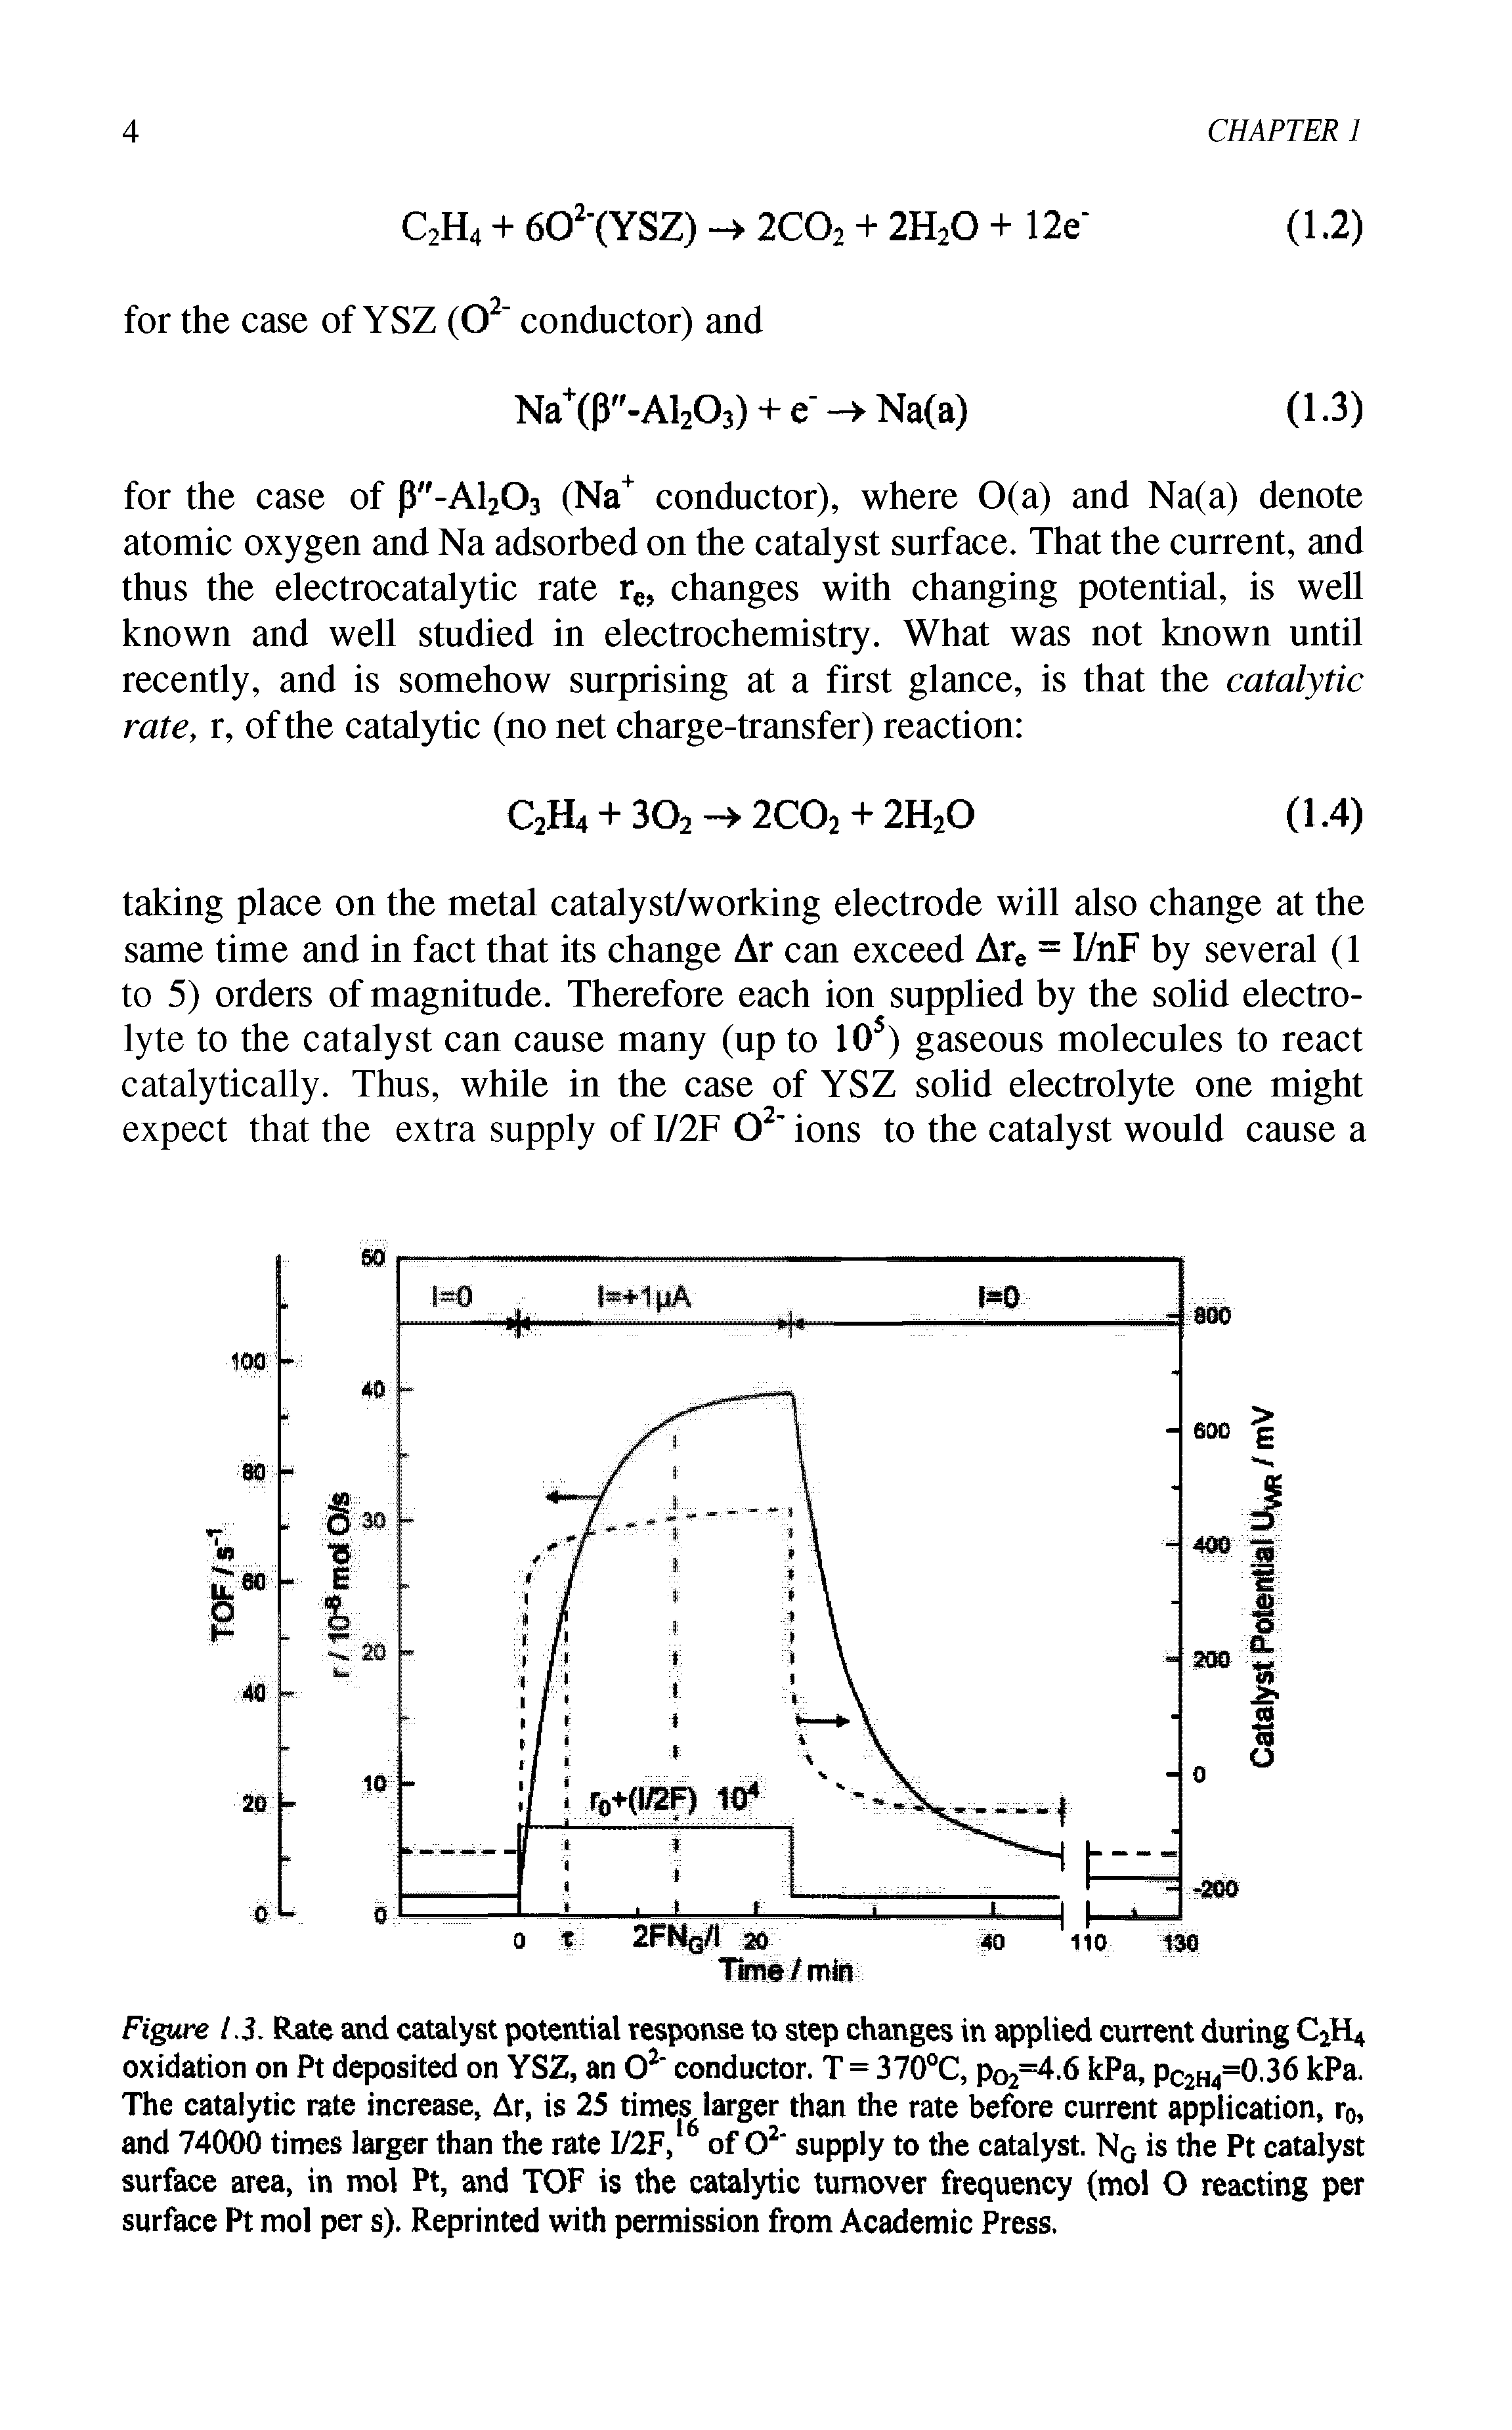 Figure 1.3. Rate and catalyst potential response to step changes in applied current during C2H4 oxidation on Pt deposited on YSZ, an O2 conductor. T = 370°C, p02=4.6 kPa, Pc2H4=0.36 kPa. The catalytic rate increase, Ar, is 25 times larger than the rate before current application, r0, and 74000 times larger than the rate I/2F,16 of 02 supply to the catalyst. N0 is the Pt catalyst surface area, in mol Pt, and TOF is the catalytic turnover frequency (mol O reacting per surface Pt mol per s). Reprinted with permission from Academic Press.